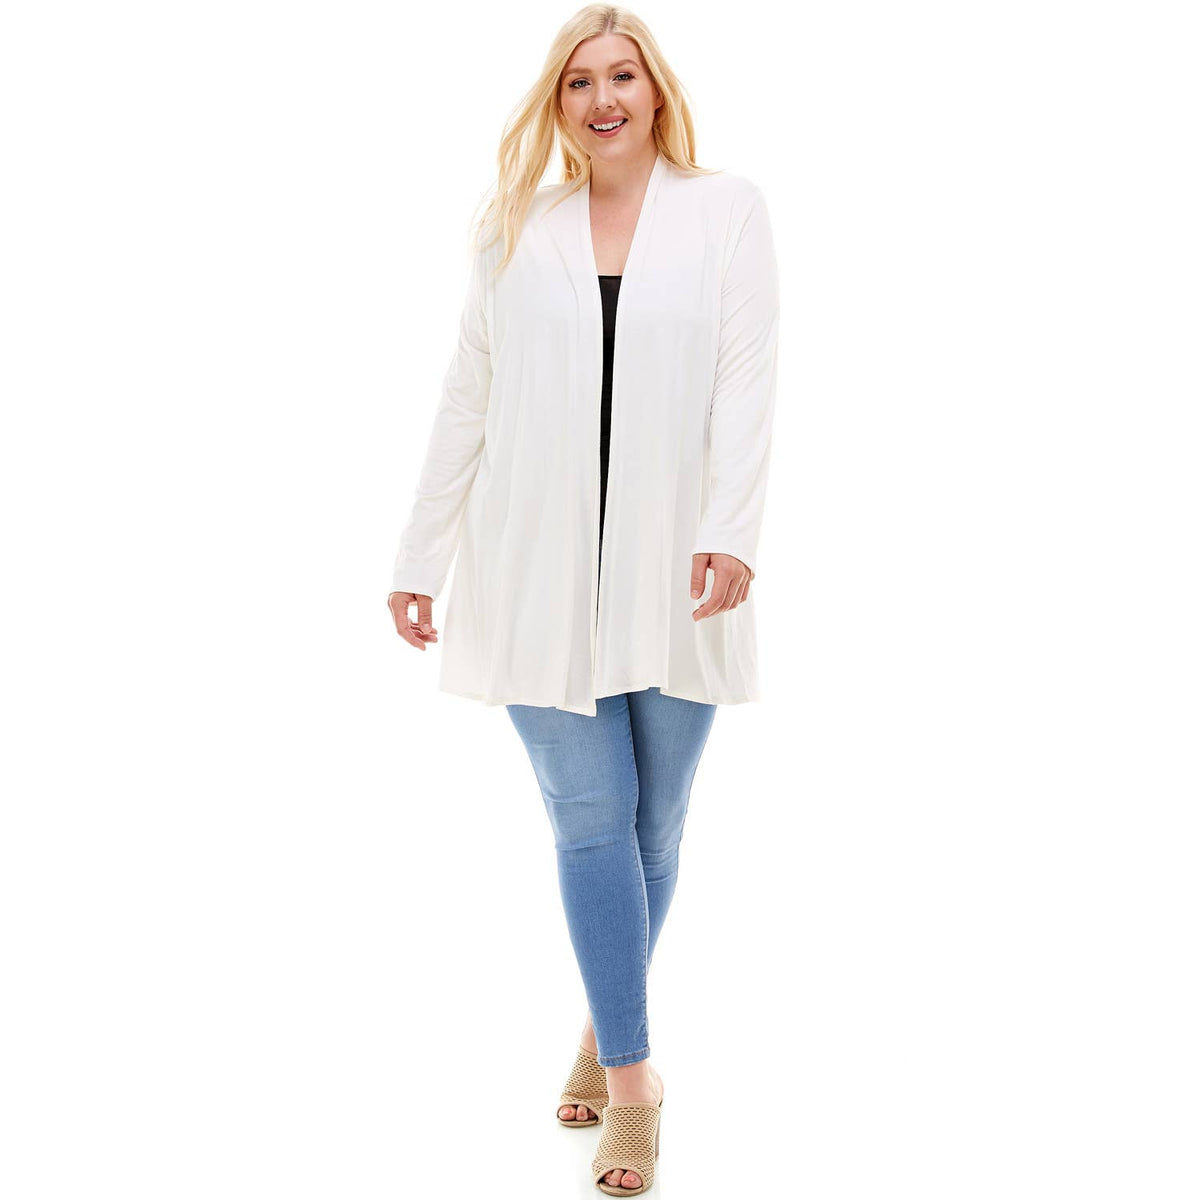 AJK-3001RSX Plus Size Long Sleeve Open Front Drape Cardigan | Made in USA | Azules Wholesale